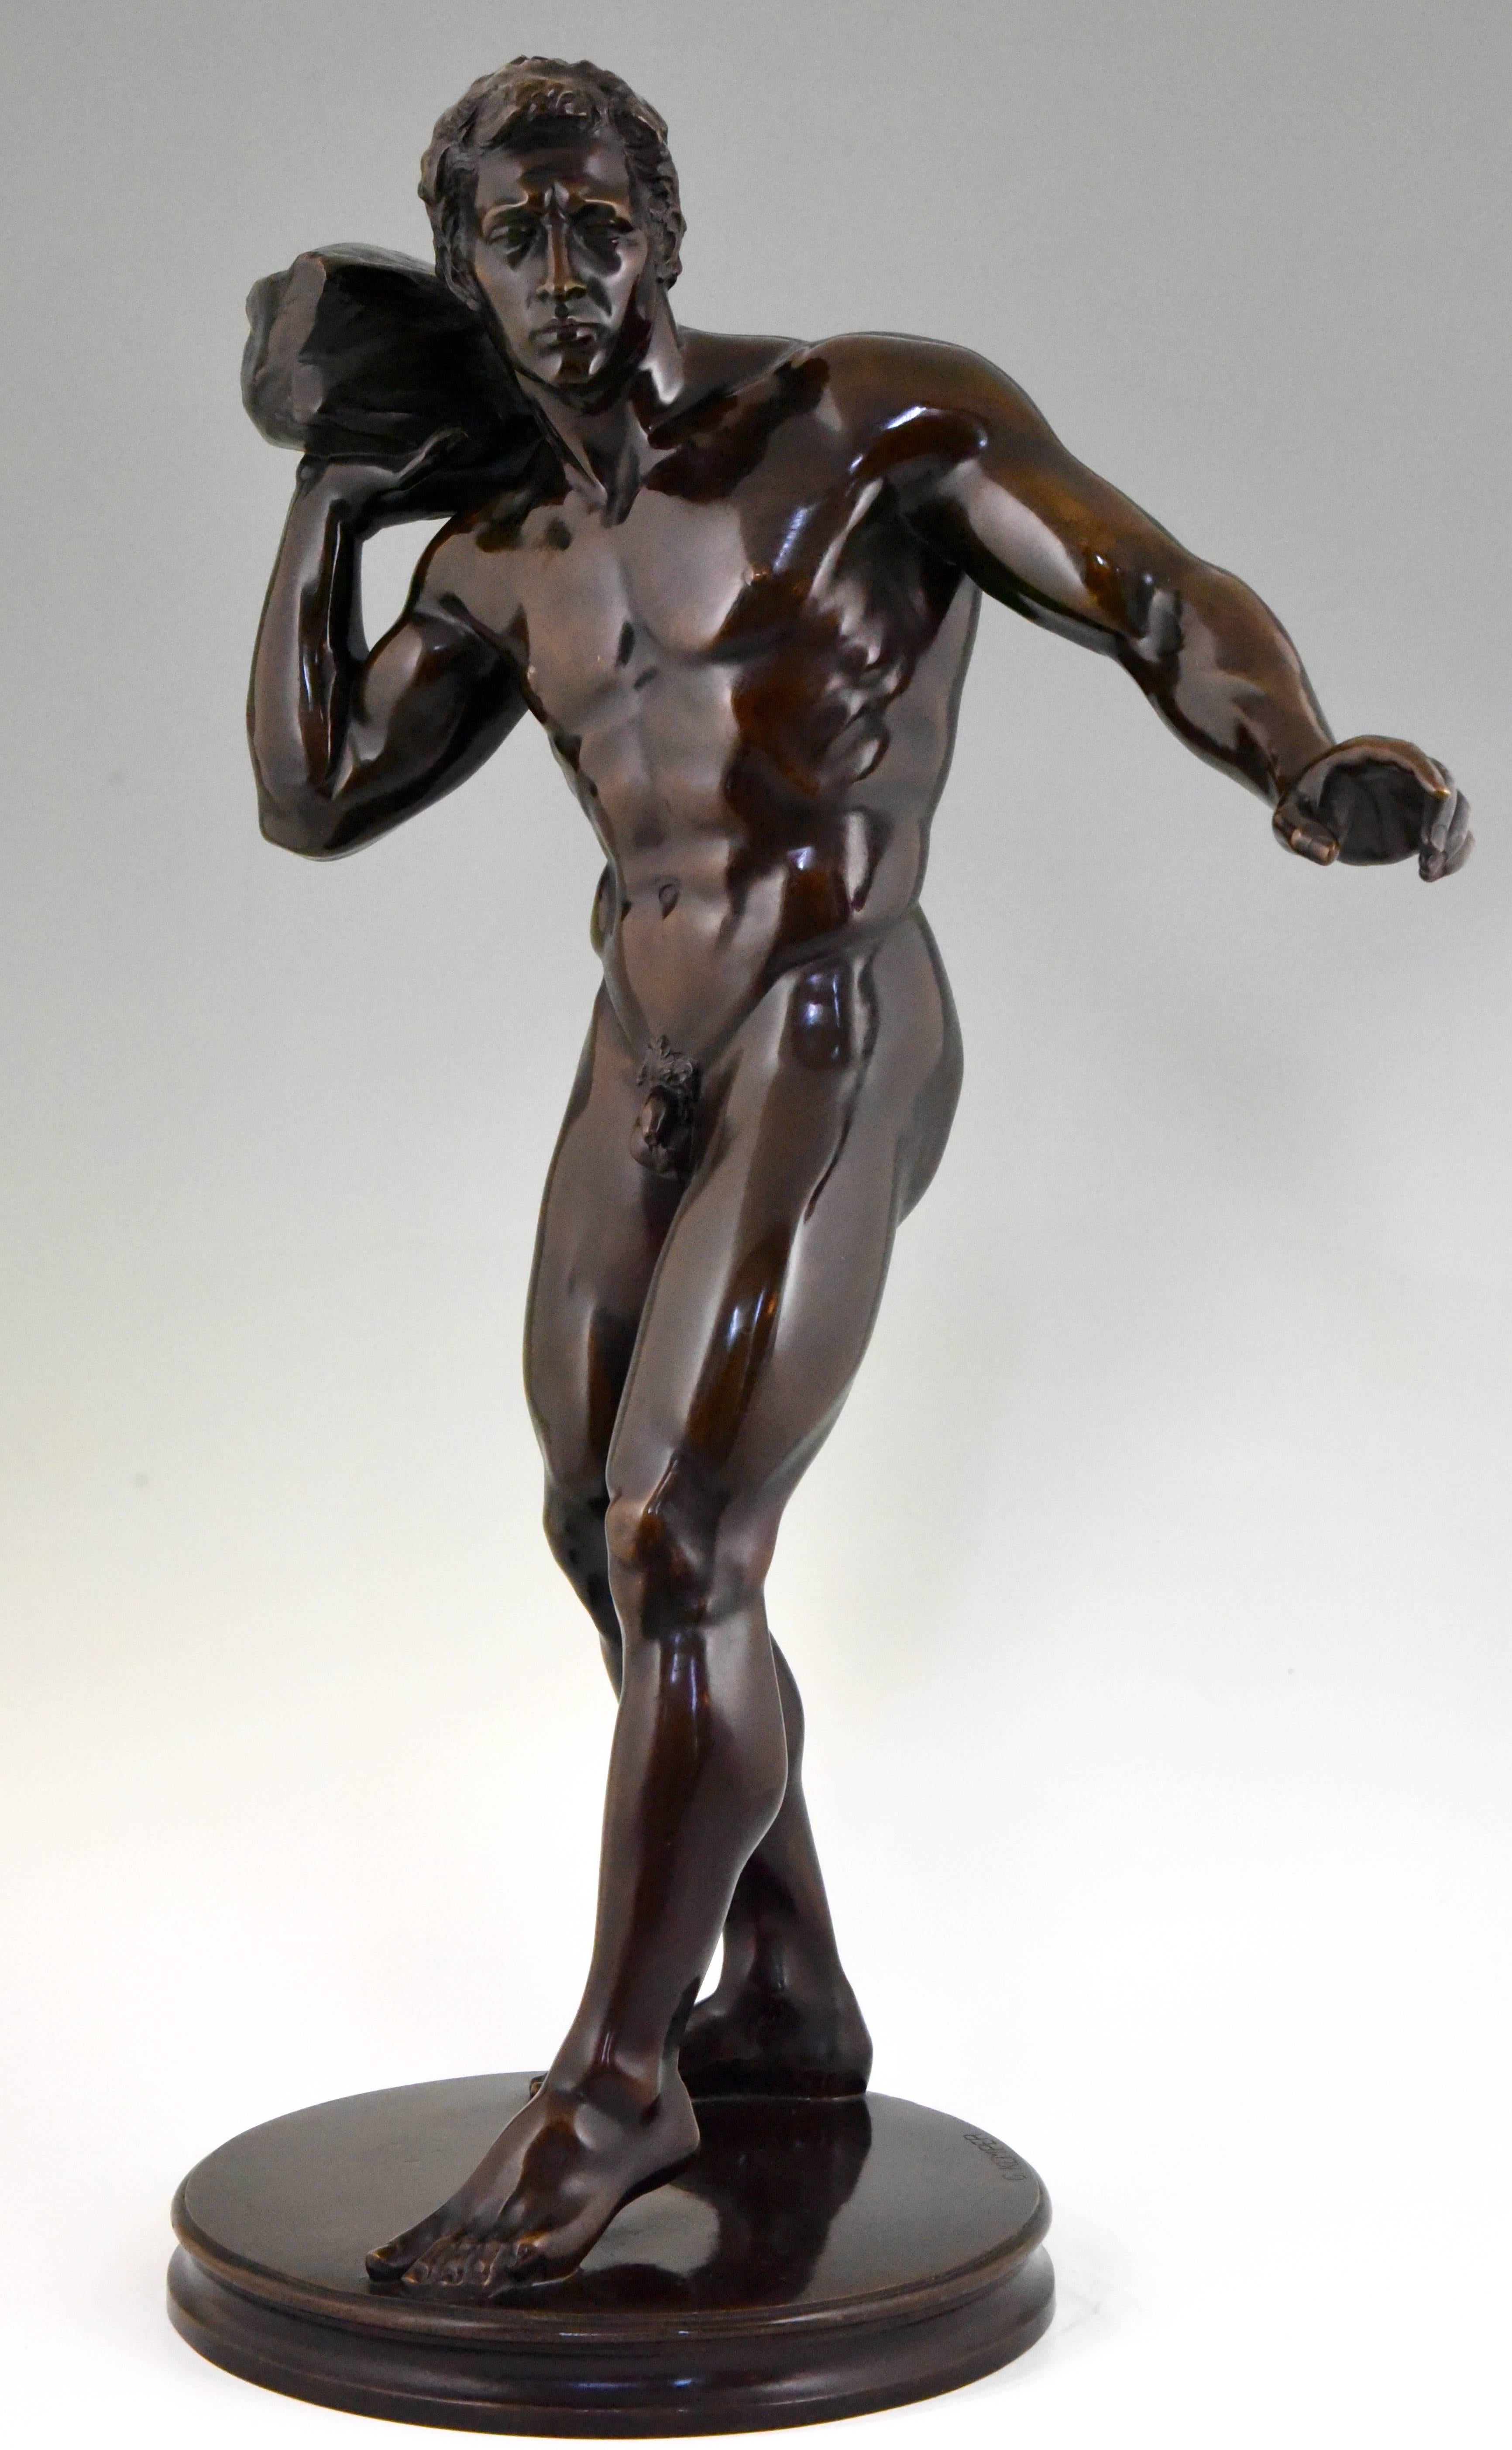 Beautiful bronze sculpture of an athletic man lifting a stone by the German artist Georg Kemper. 

Artist/ maker: Georg Kemper
Signature/ marks: G. Kemper.
Style: Romantic.
Date: 1900.
Material: Bronze.
Origin: Germany.
Size: H. 86 cm x L 57